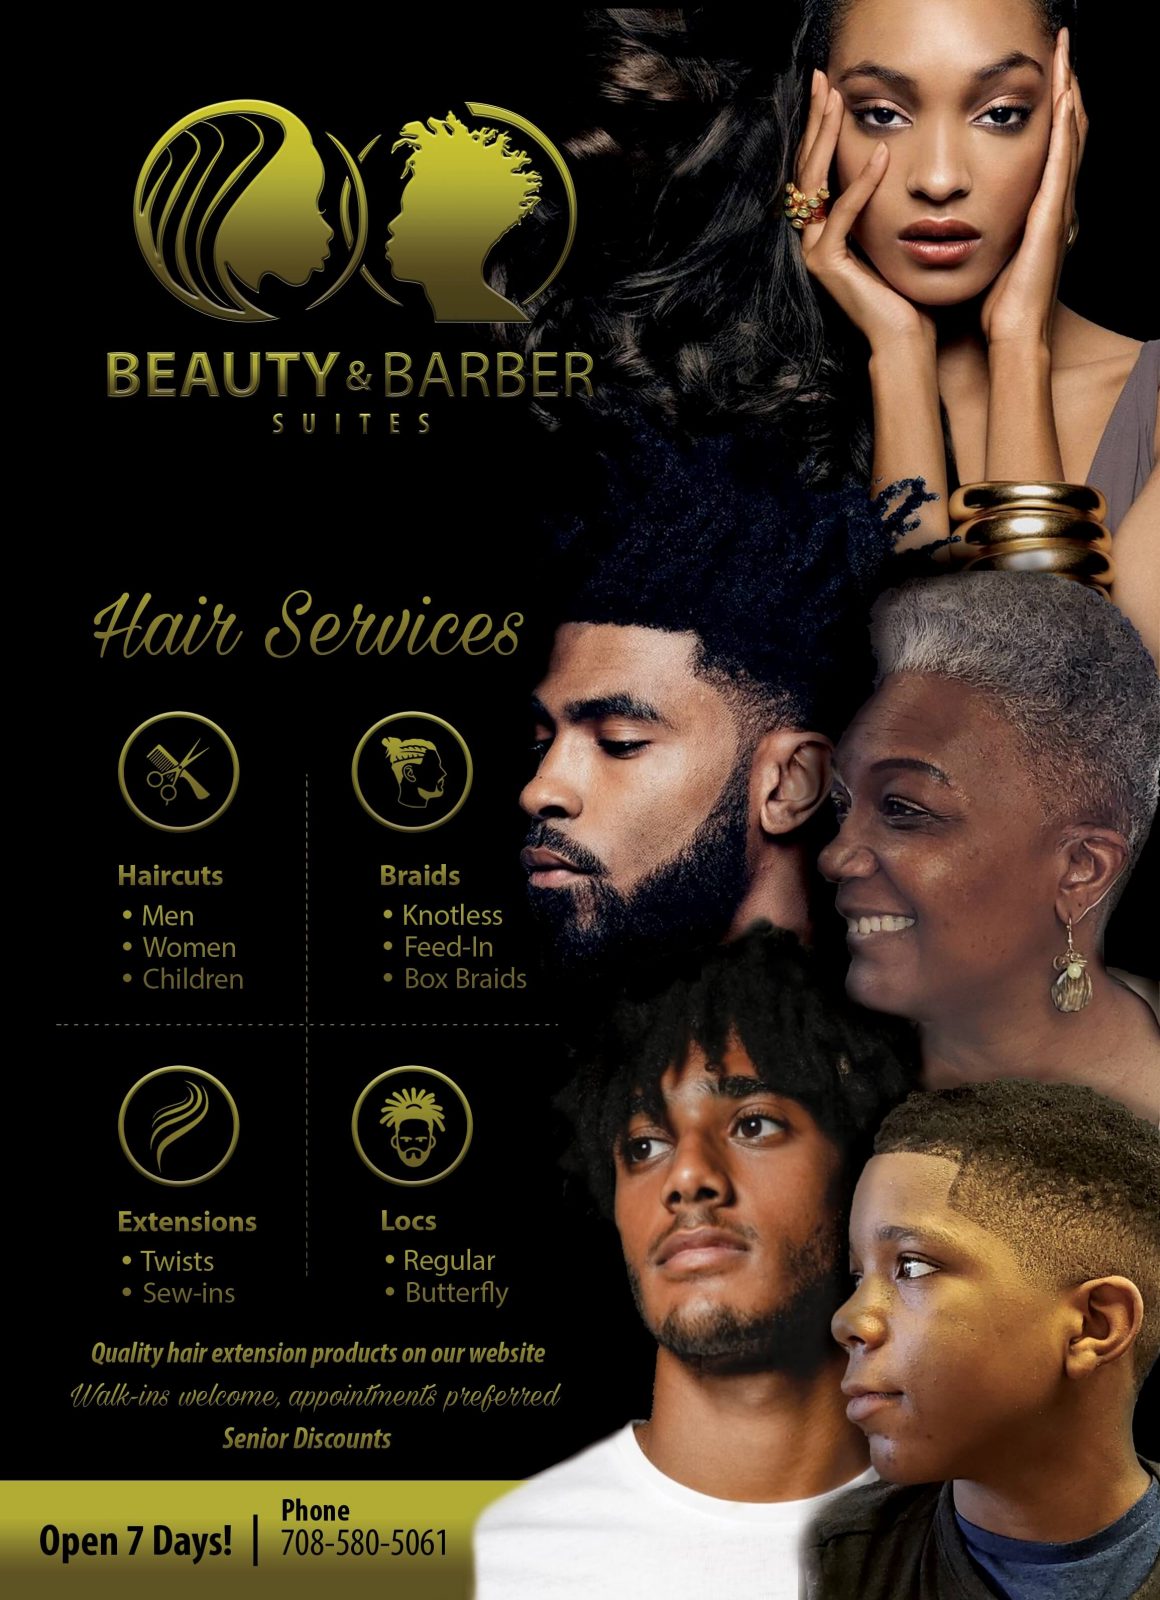 Beauty & Barber Suites hair services